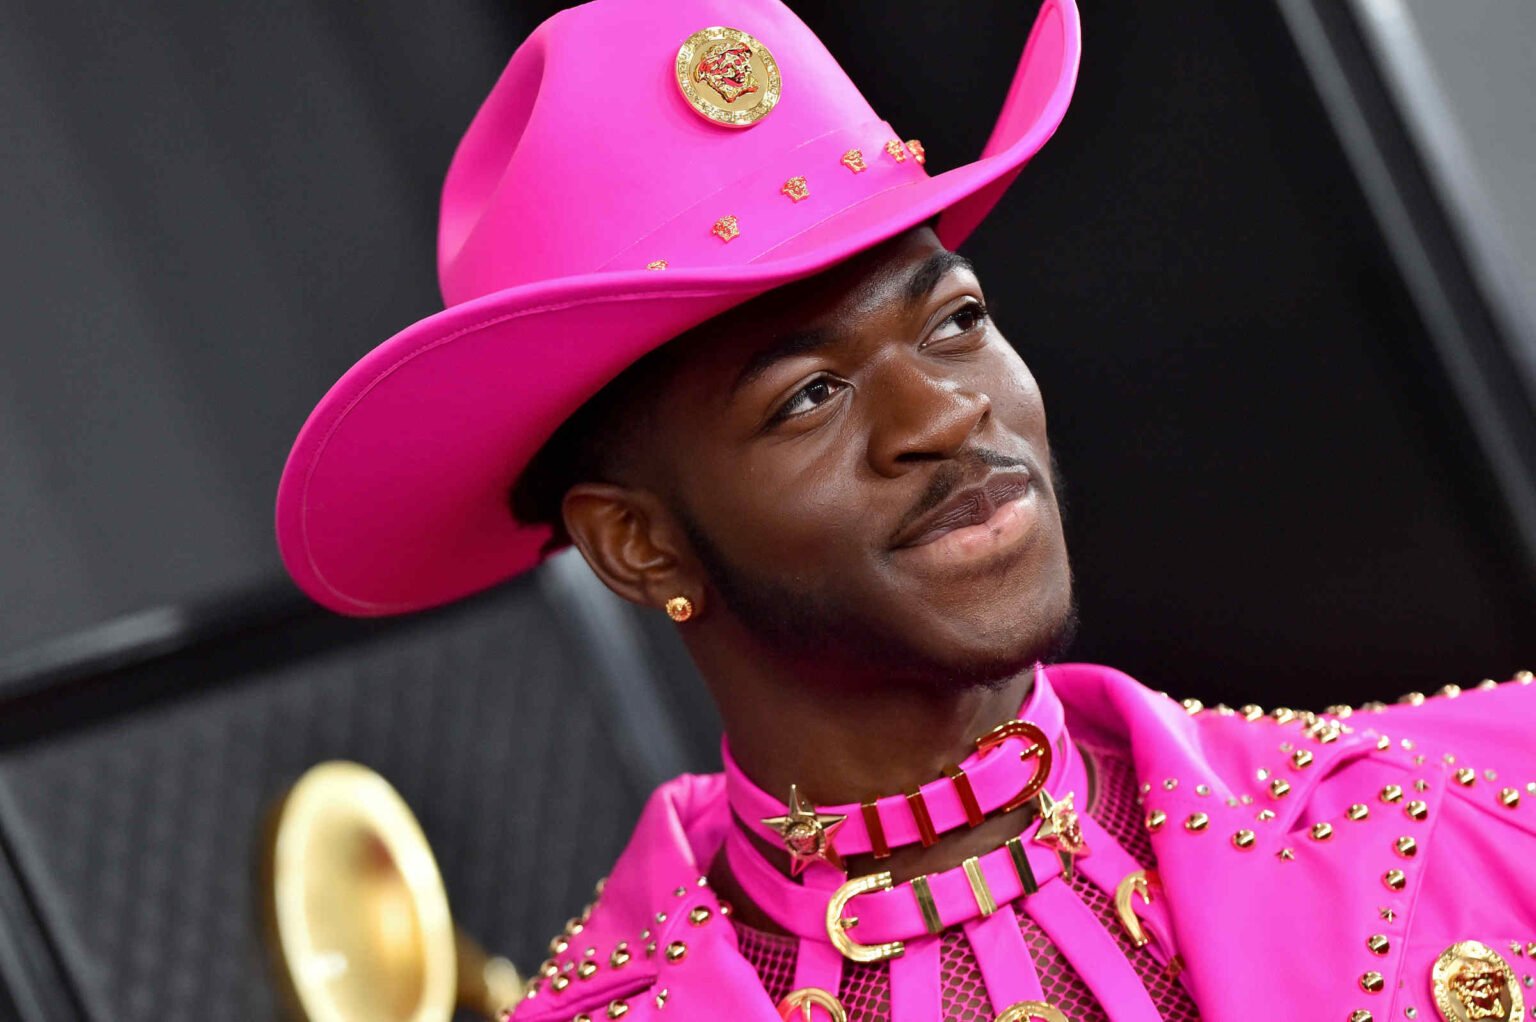 From yee-ing the strongest haw to seducing Satan, Lil Nas X isn't afraid to cause a stir. Is it even a Lil Nas X video if it's not causing controversy?